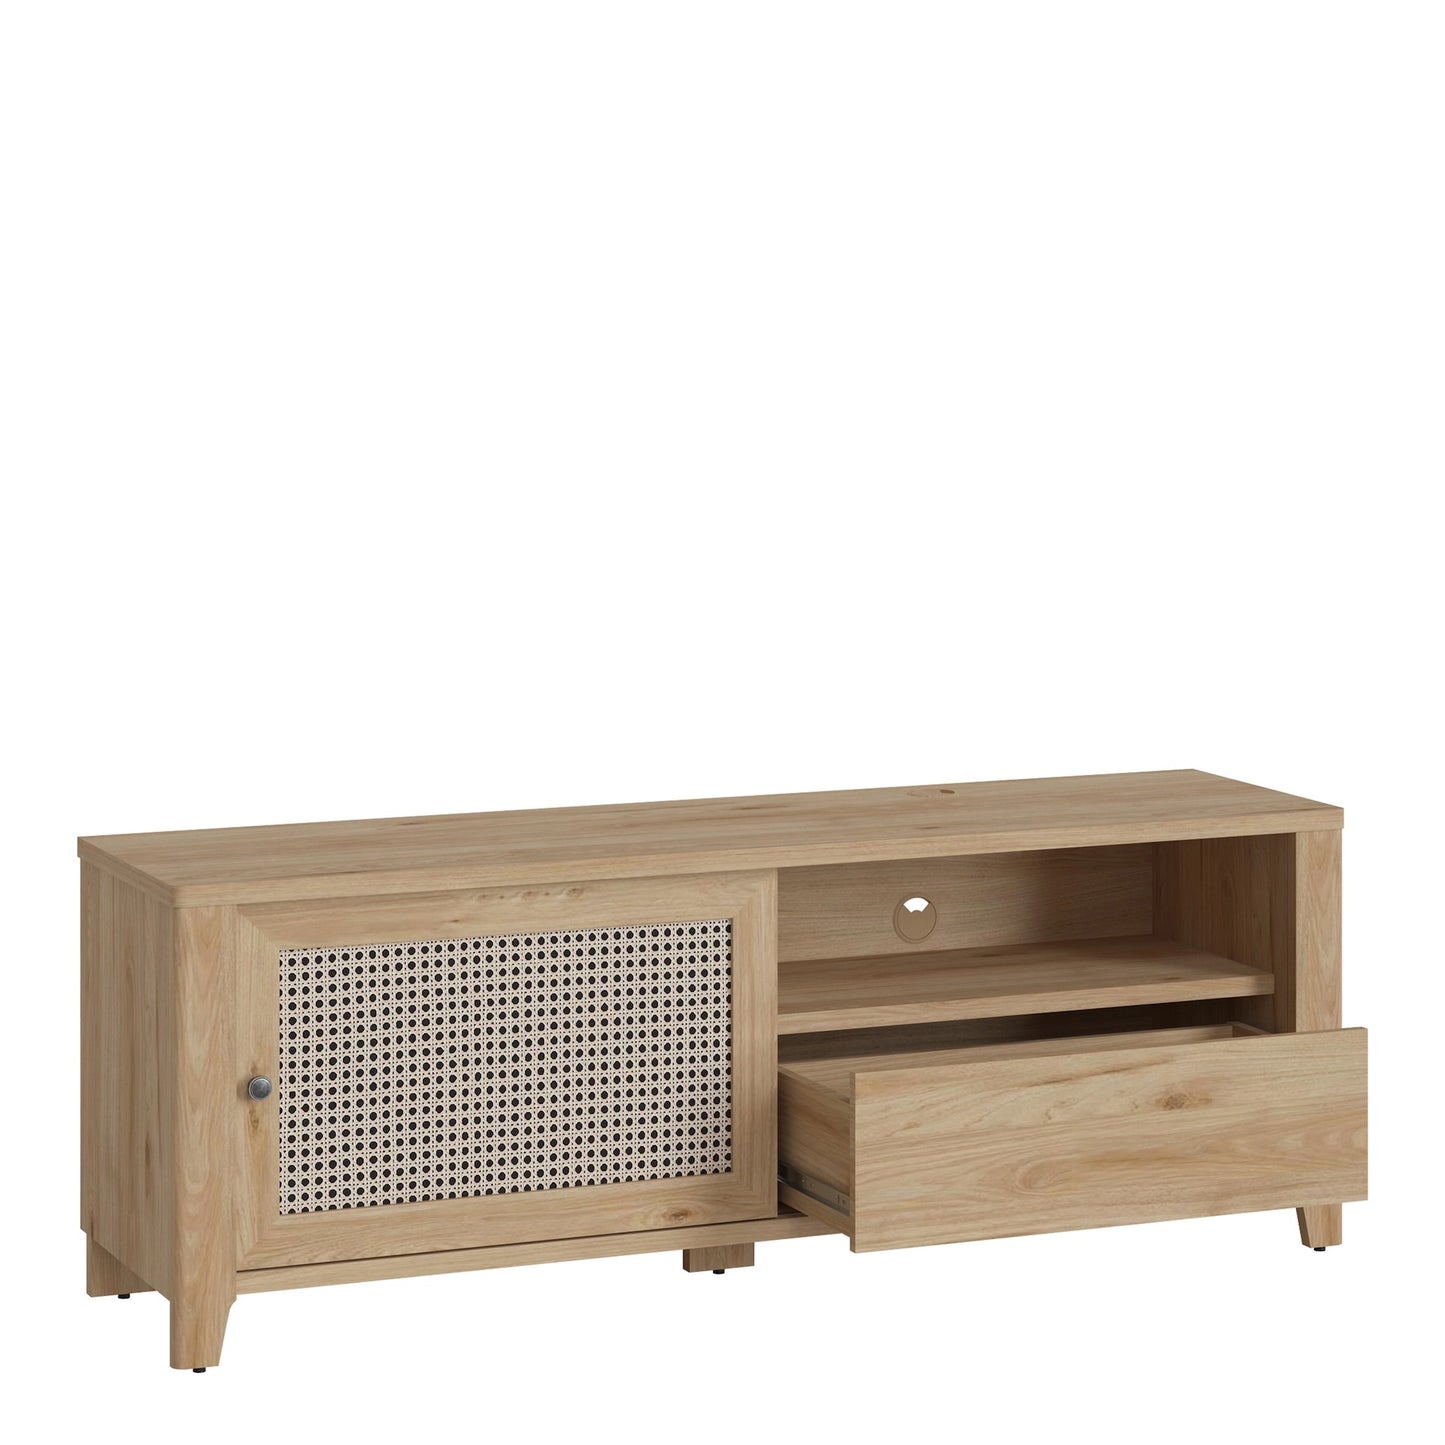 Furniture To Go Cestino 1 Door 1 Drawer TV Unit in Jackson Hickory Oak & Rattan Effect